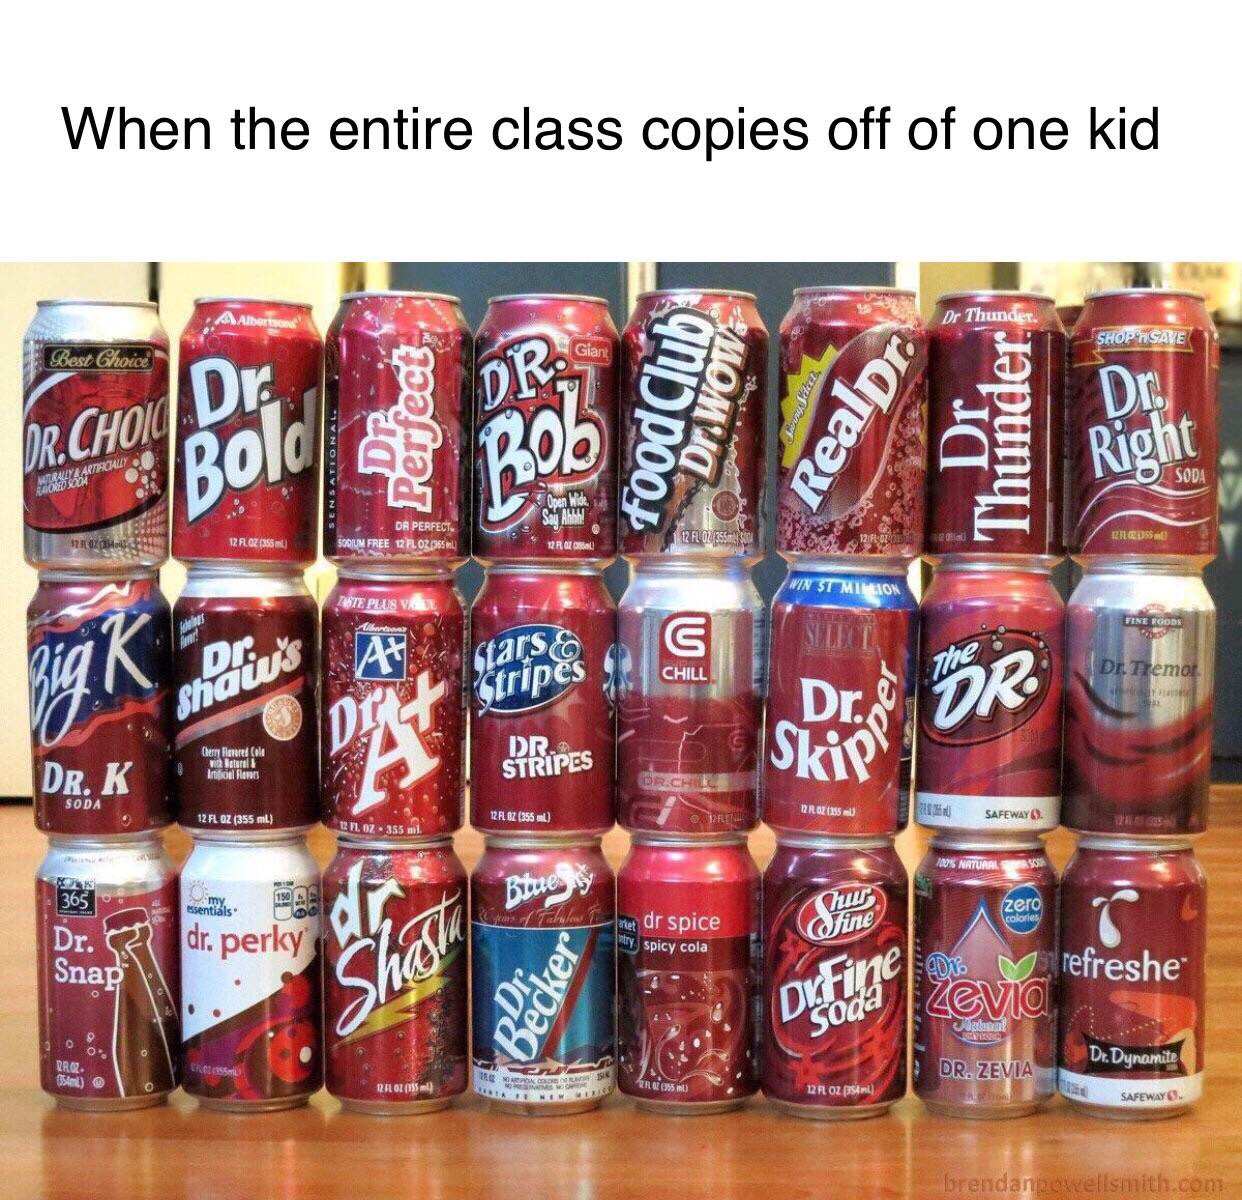 dr thunder meme - When the entire class copies off of one kid Dr Thunder Shop Save Giant Best Choice Dv Db Or. Choo Bold Perfect Reals Dr. Thunder Right Fakryl Artprobaly Soda Dr Perfect Sodium Free FLO2055 12 Ore RED55 12 Filoz 355 12 Fl 0235m 12 R Nin S